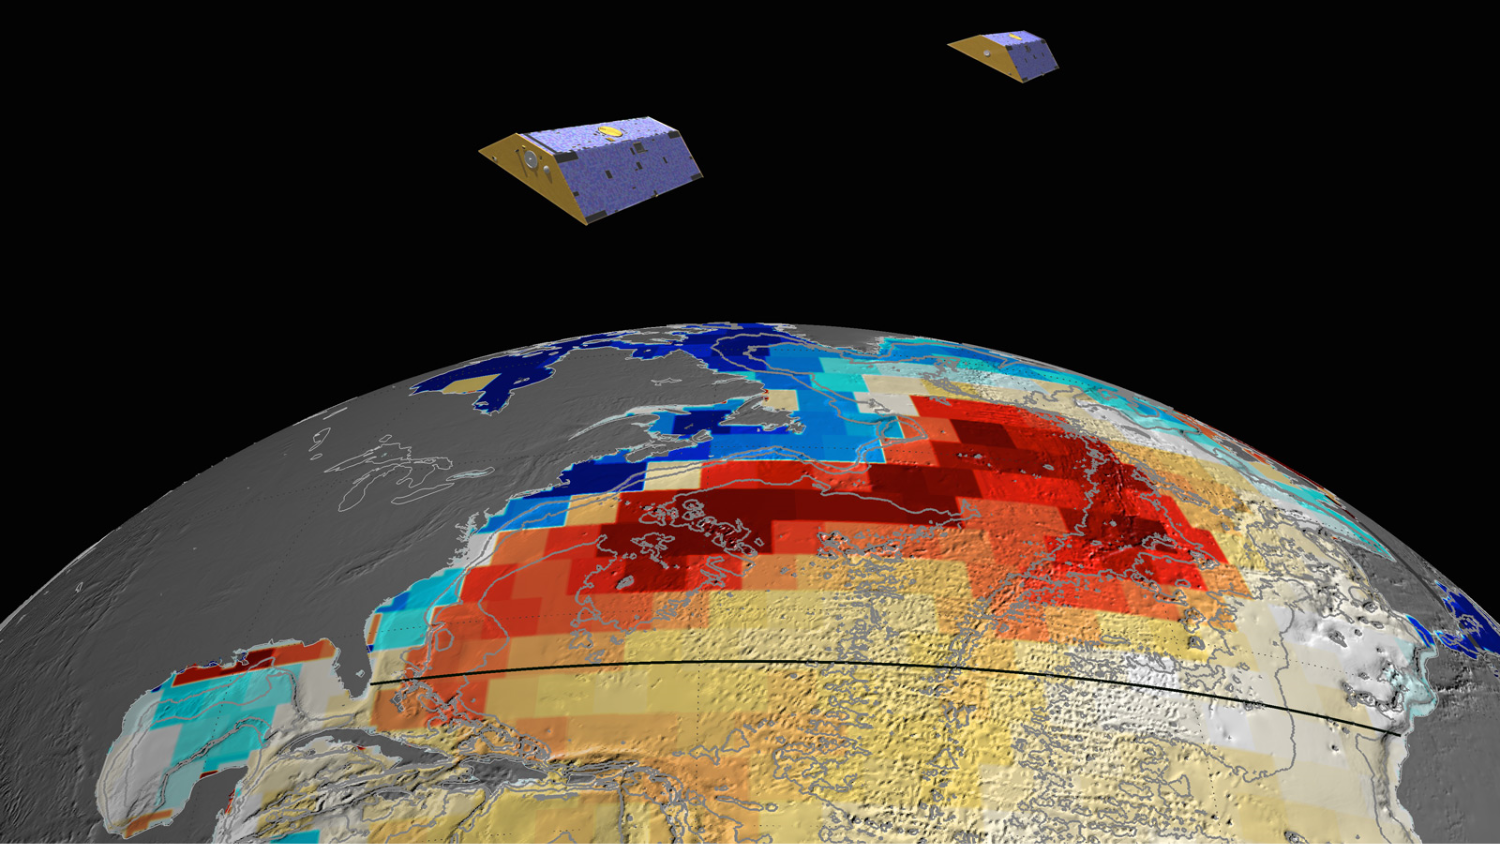 GRACE-FO will measure Atlantic Ocean bottom pressure as an indicator of deep ocean current speed, as GRACE did. This pattern of above-average (blue) and below-average (red) seafloor pressure in 2009 GRACE data revealed a temporary slowing of deep ocean currents. 